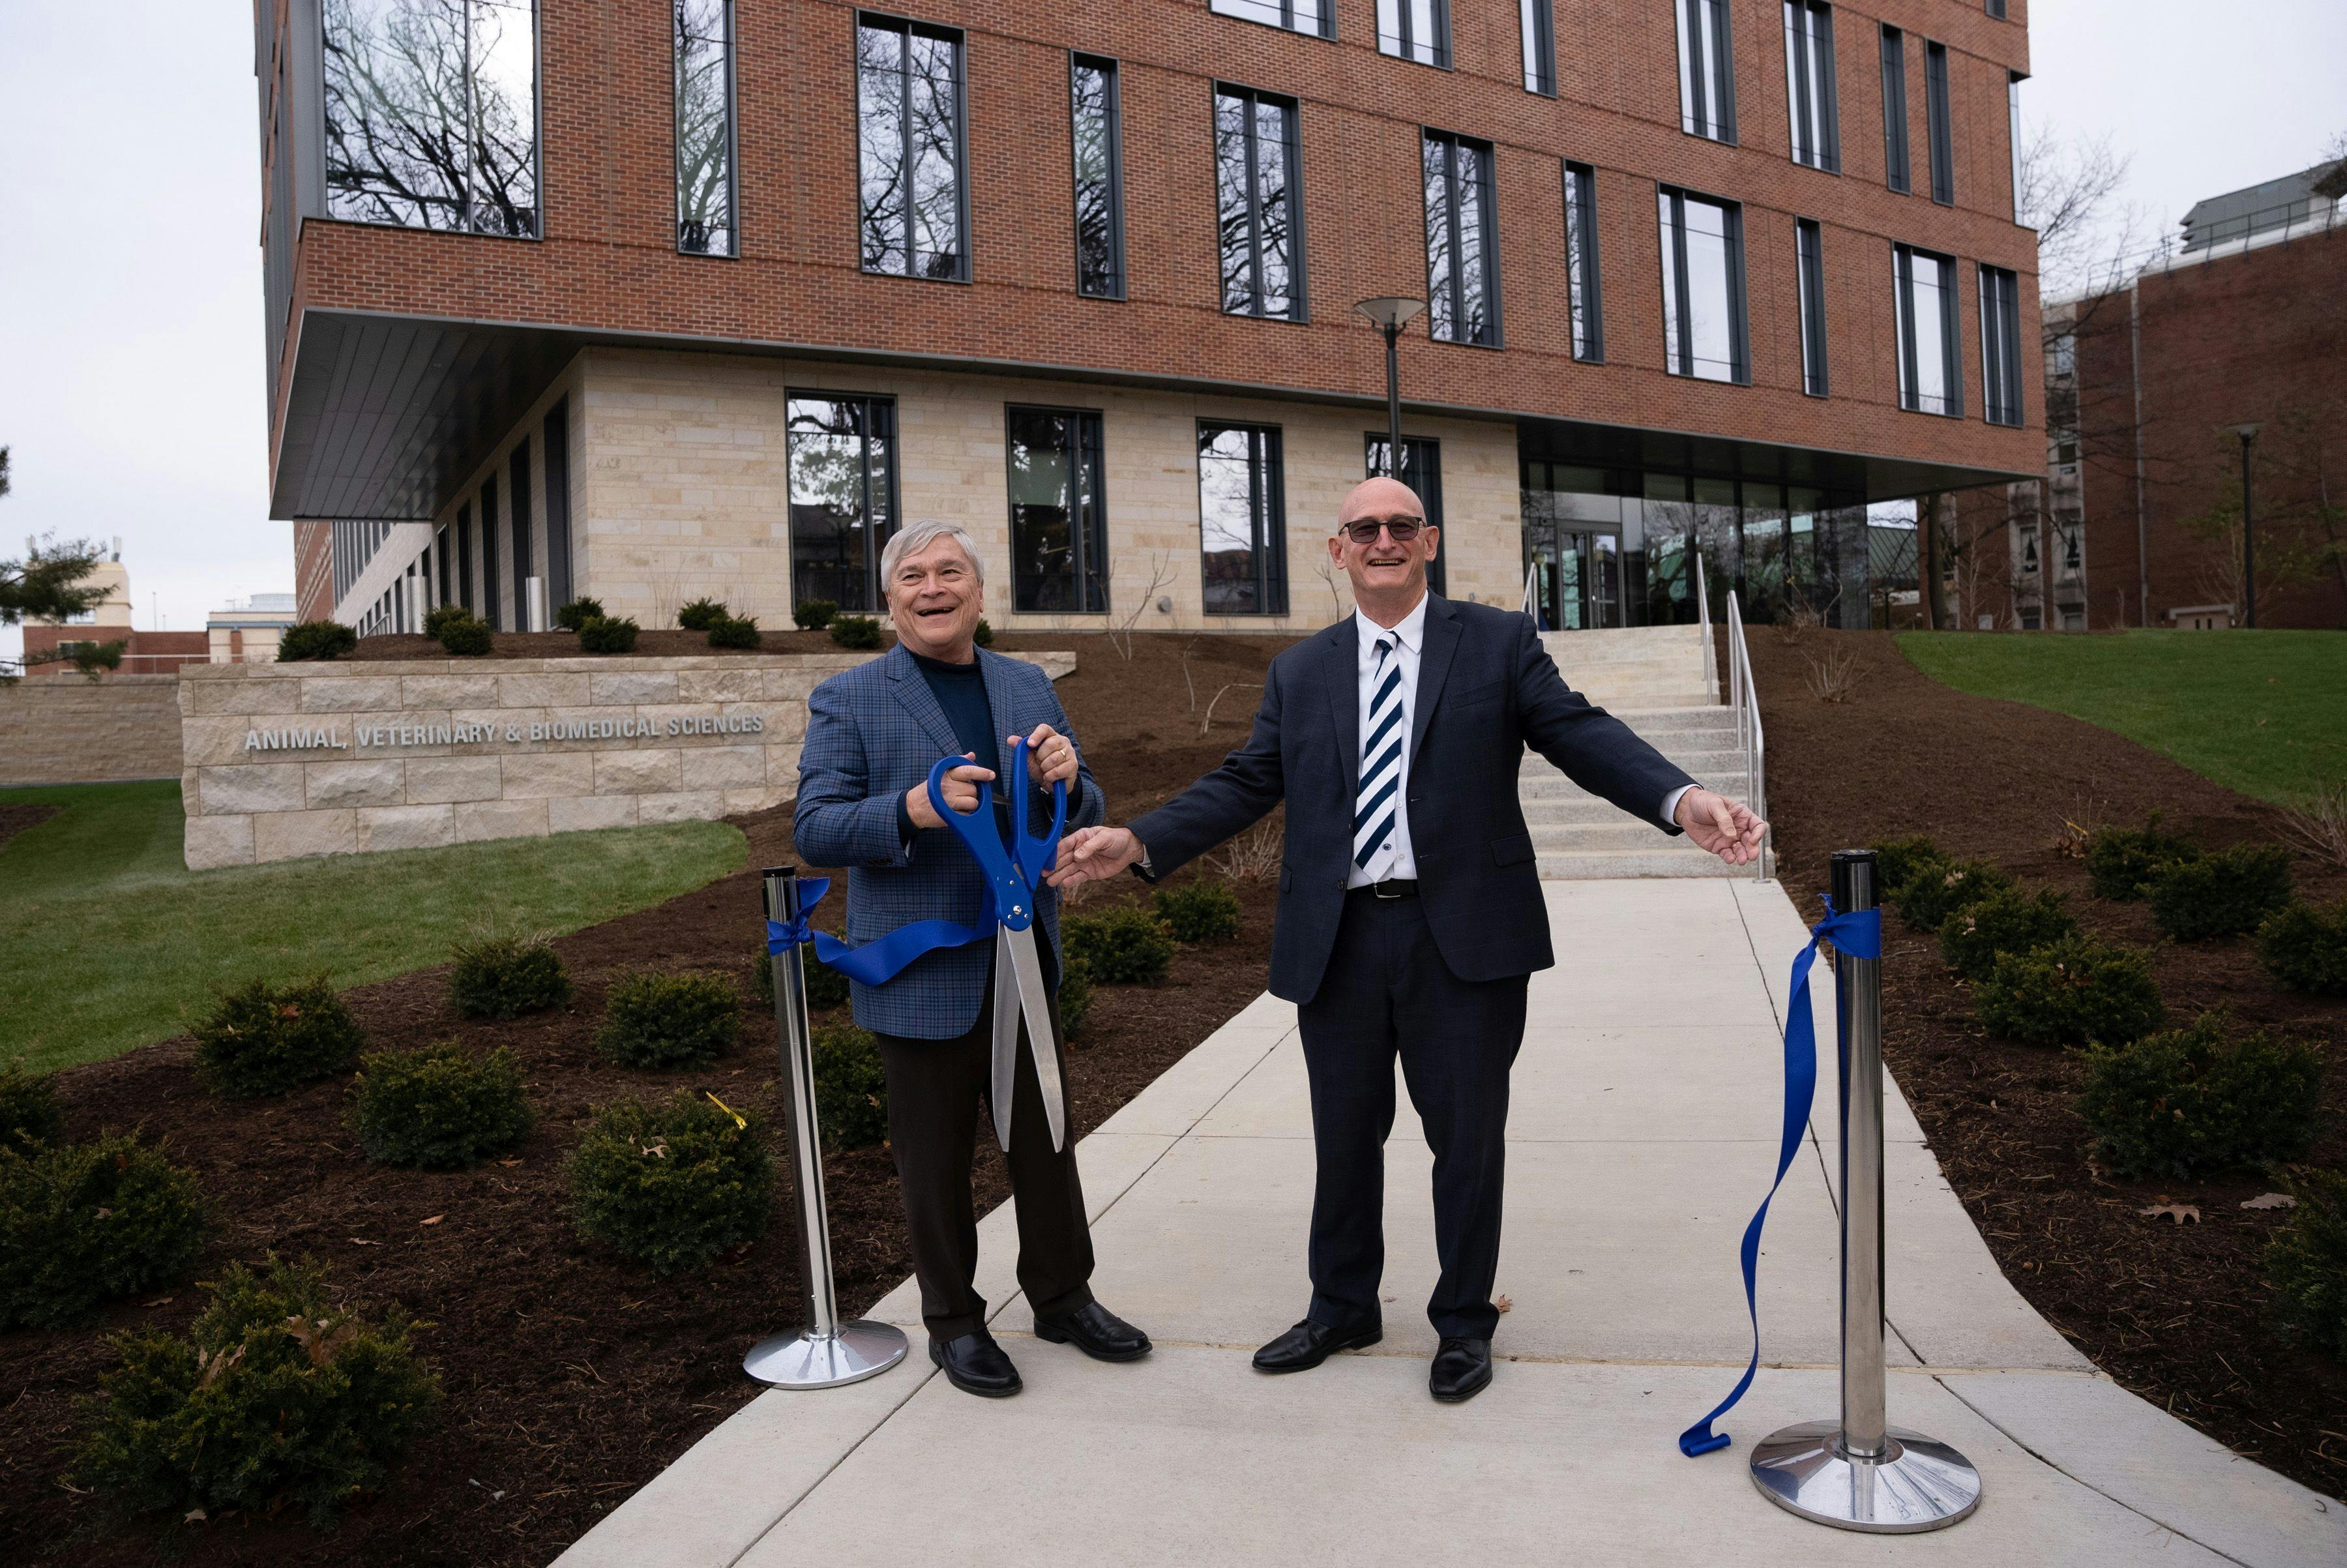 Penn State debuts new Animal, Veterinary and Biomedical Sciences Building